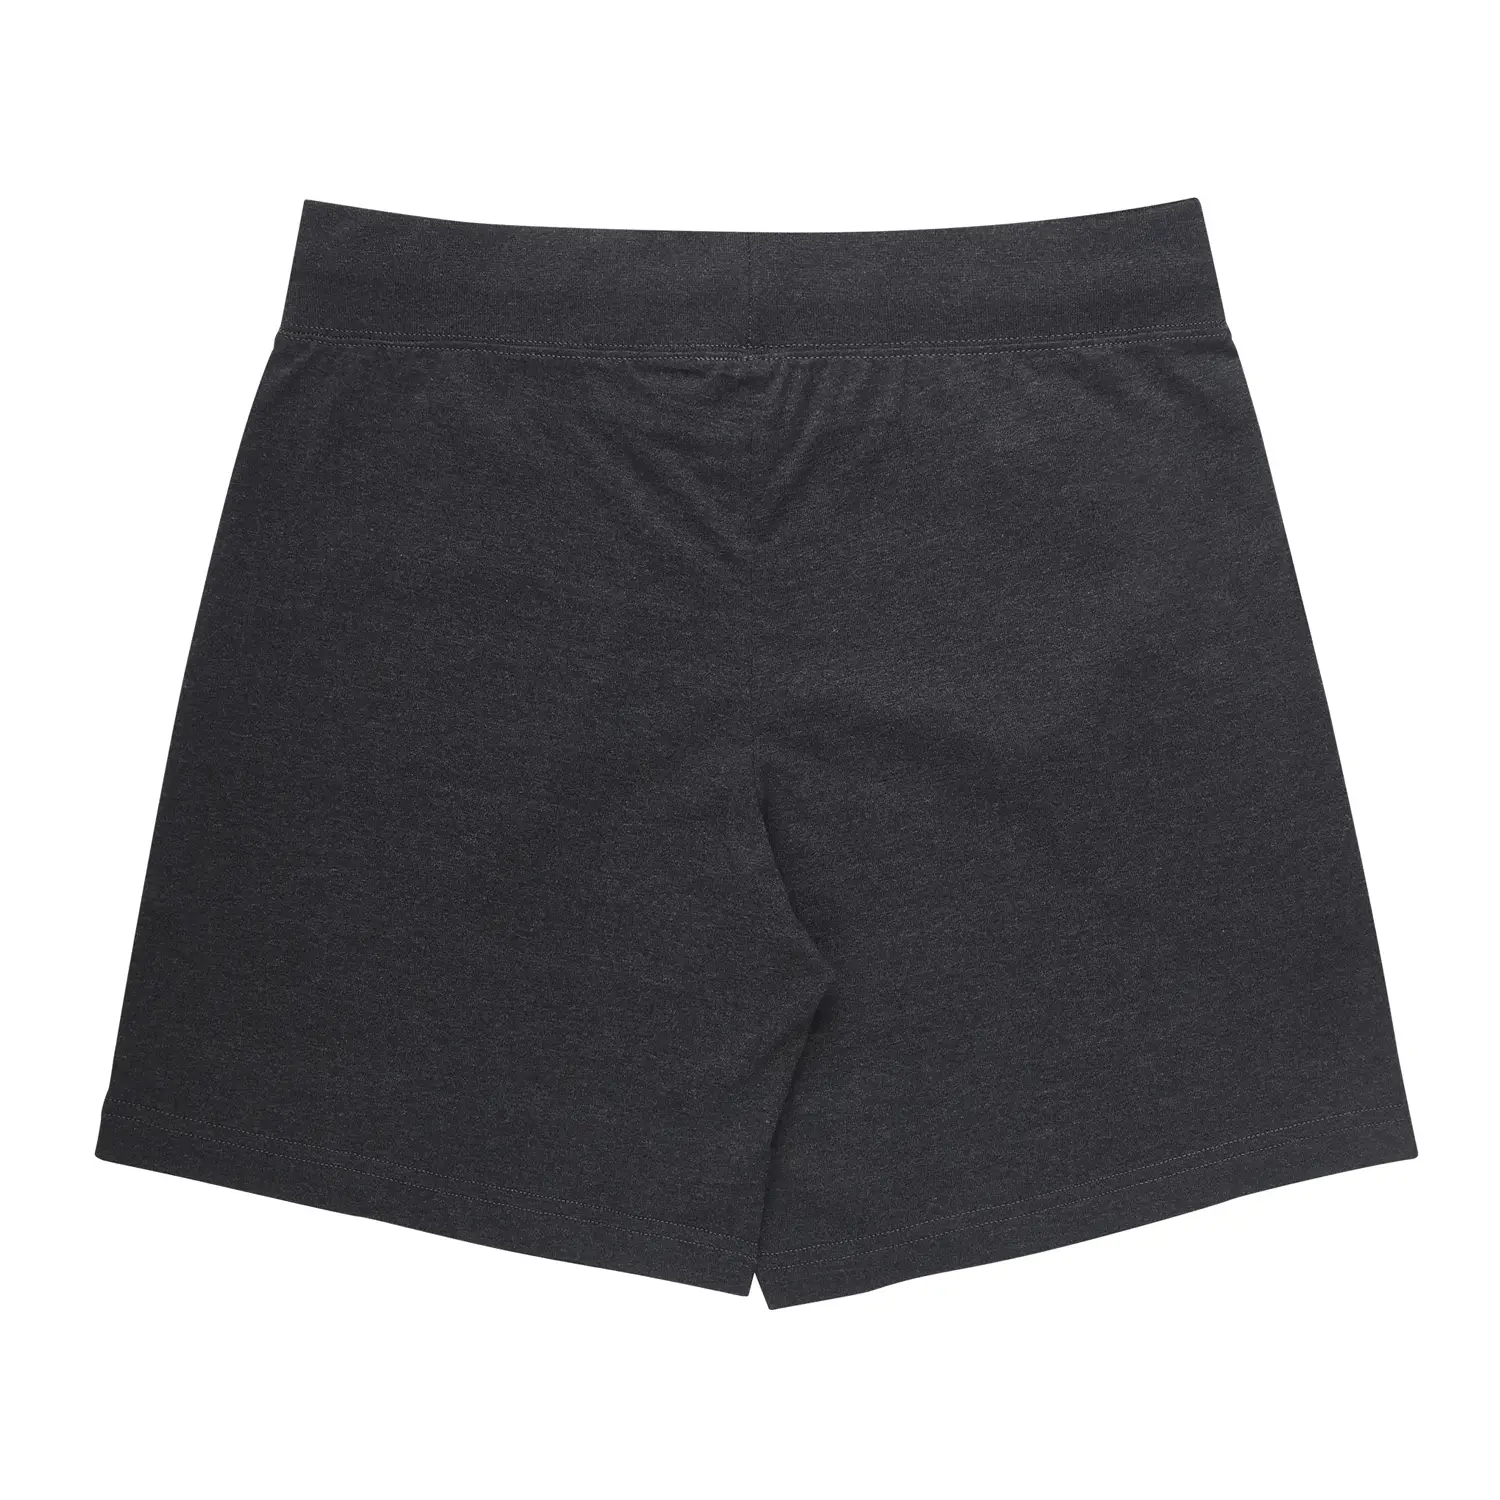 Sofra Ladies Jersey Shorts Pack of 3